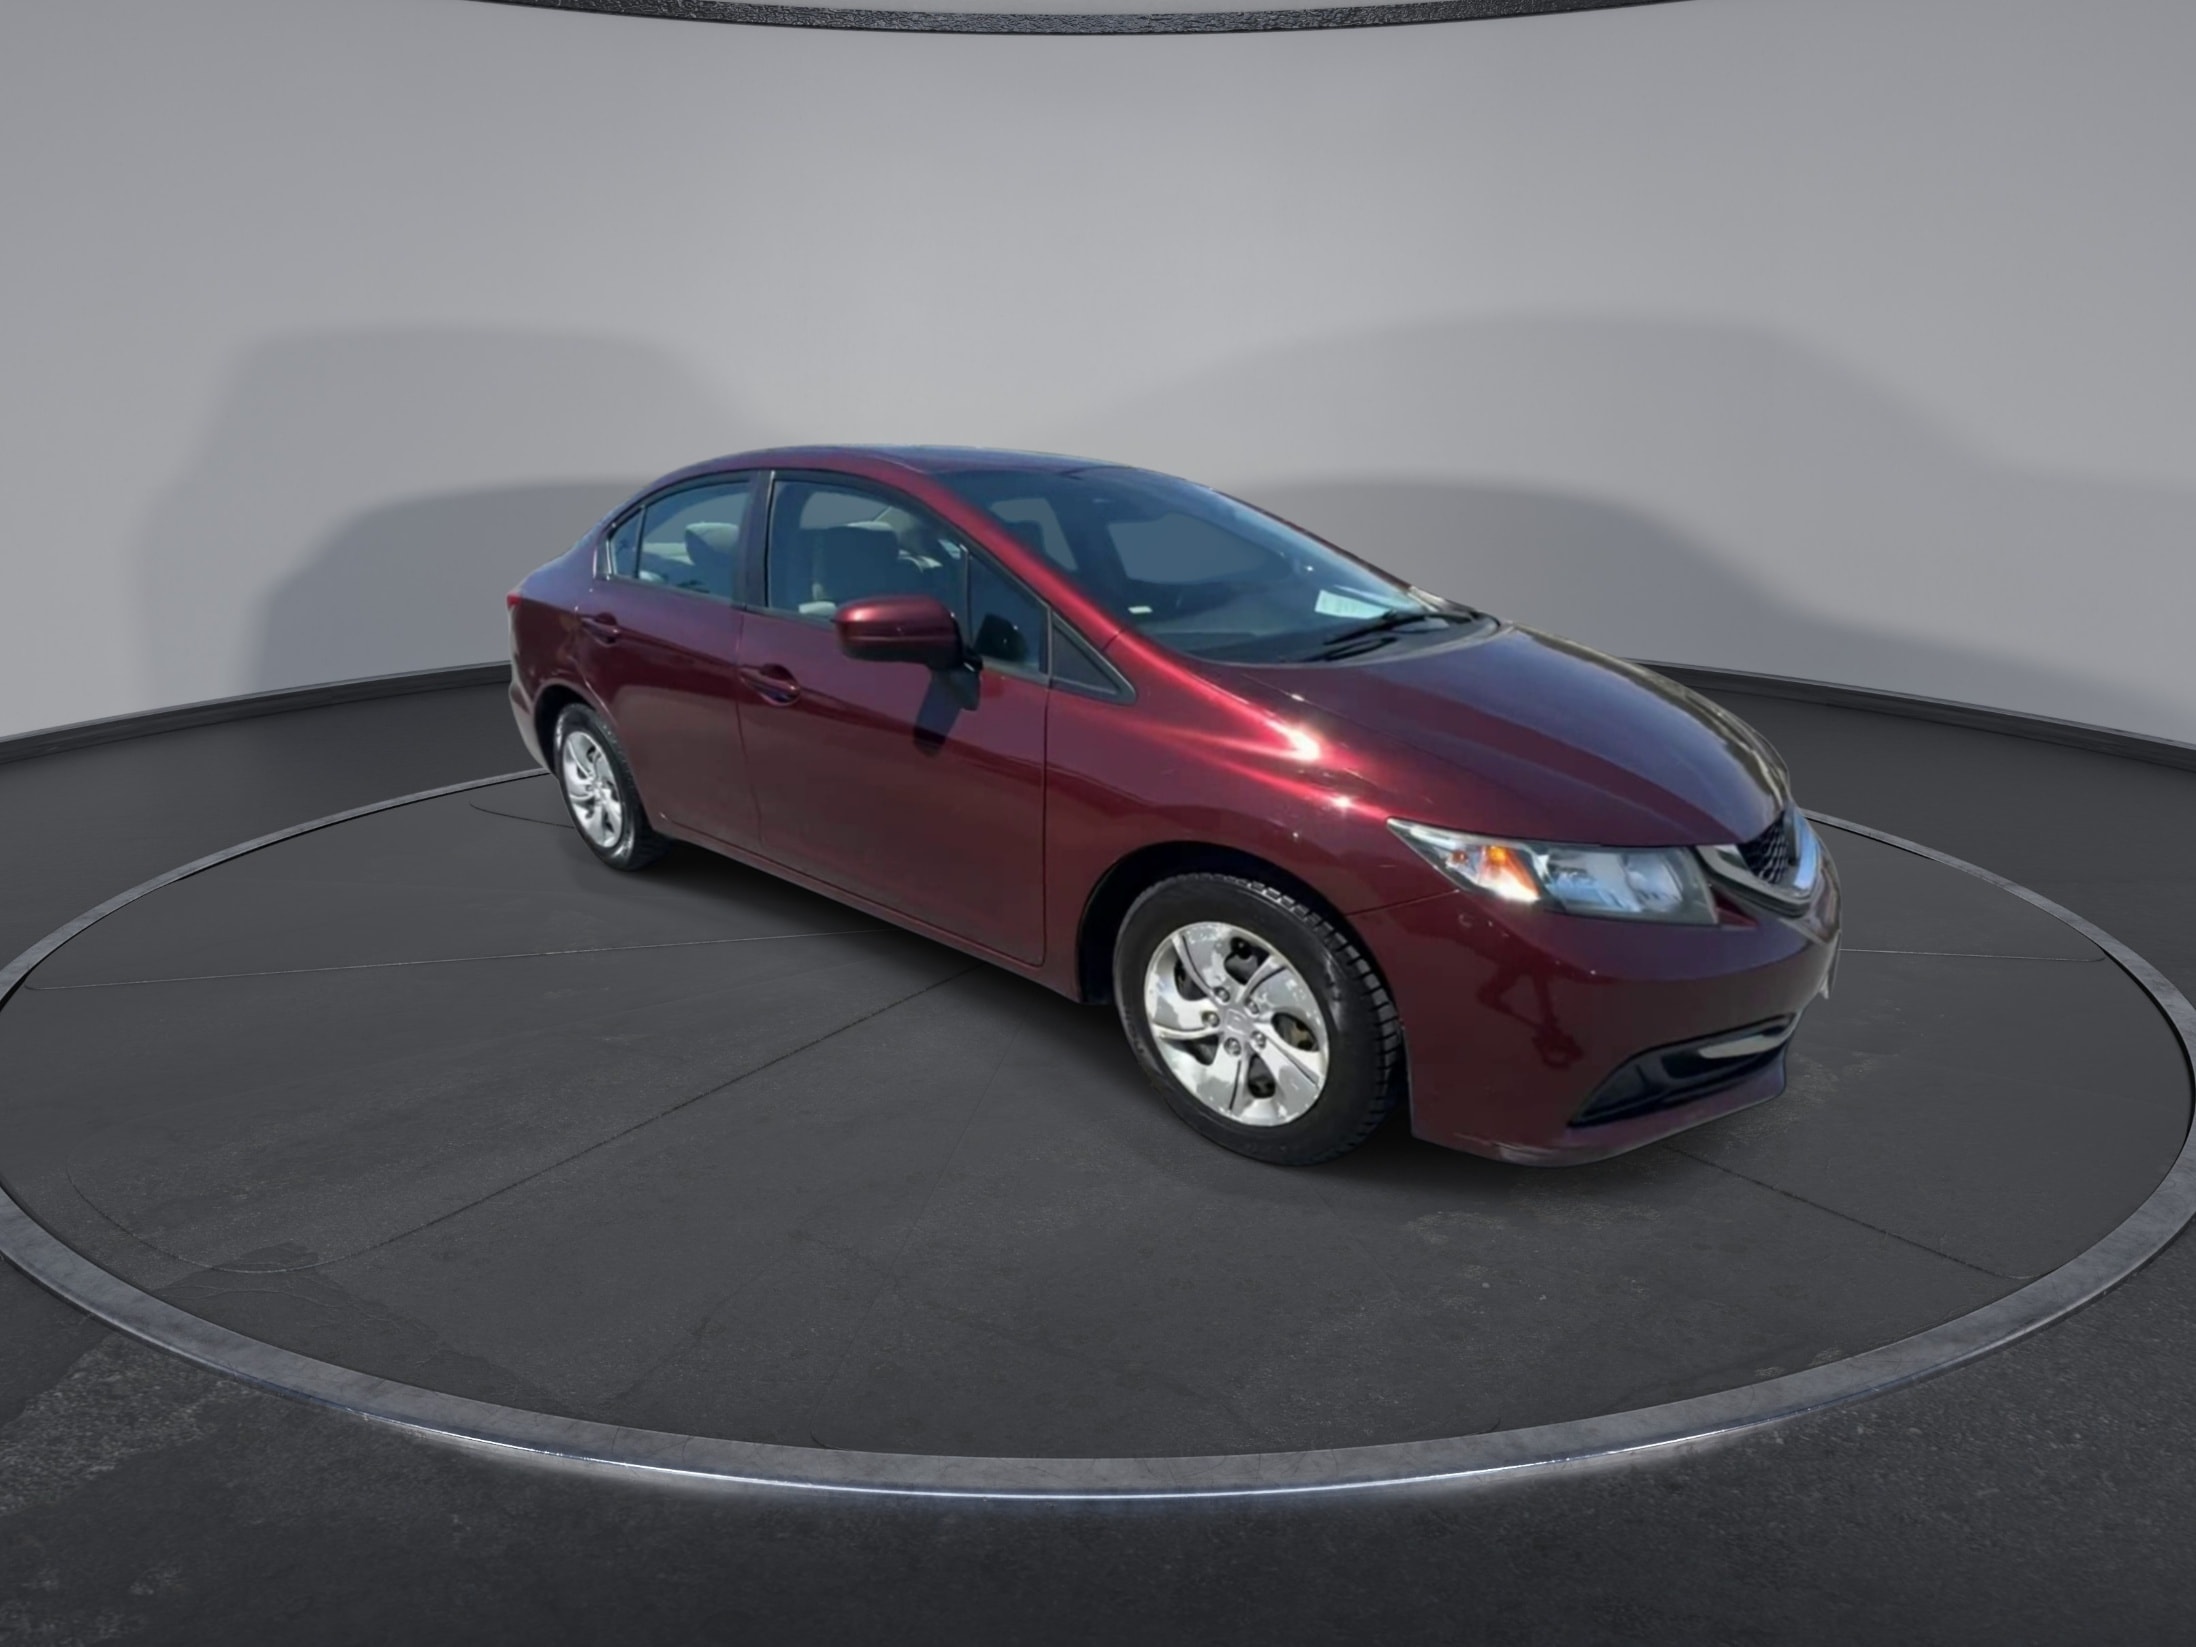 Used 2015 Honda Civic LX with VIN 19XFB2F58FE058599 for sale in Berlin, VT